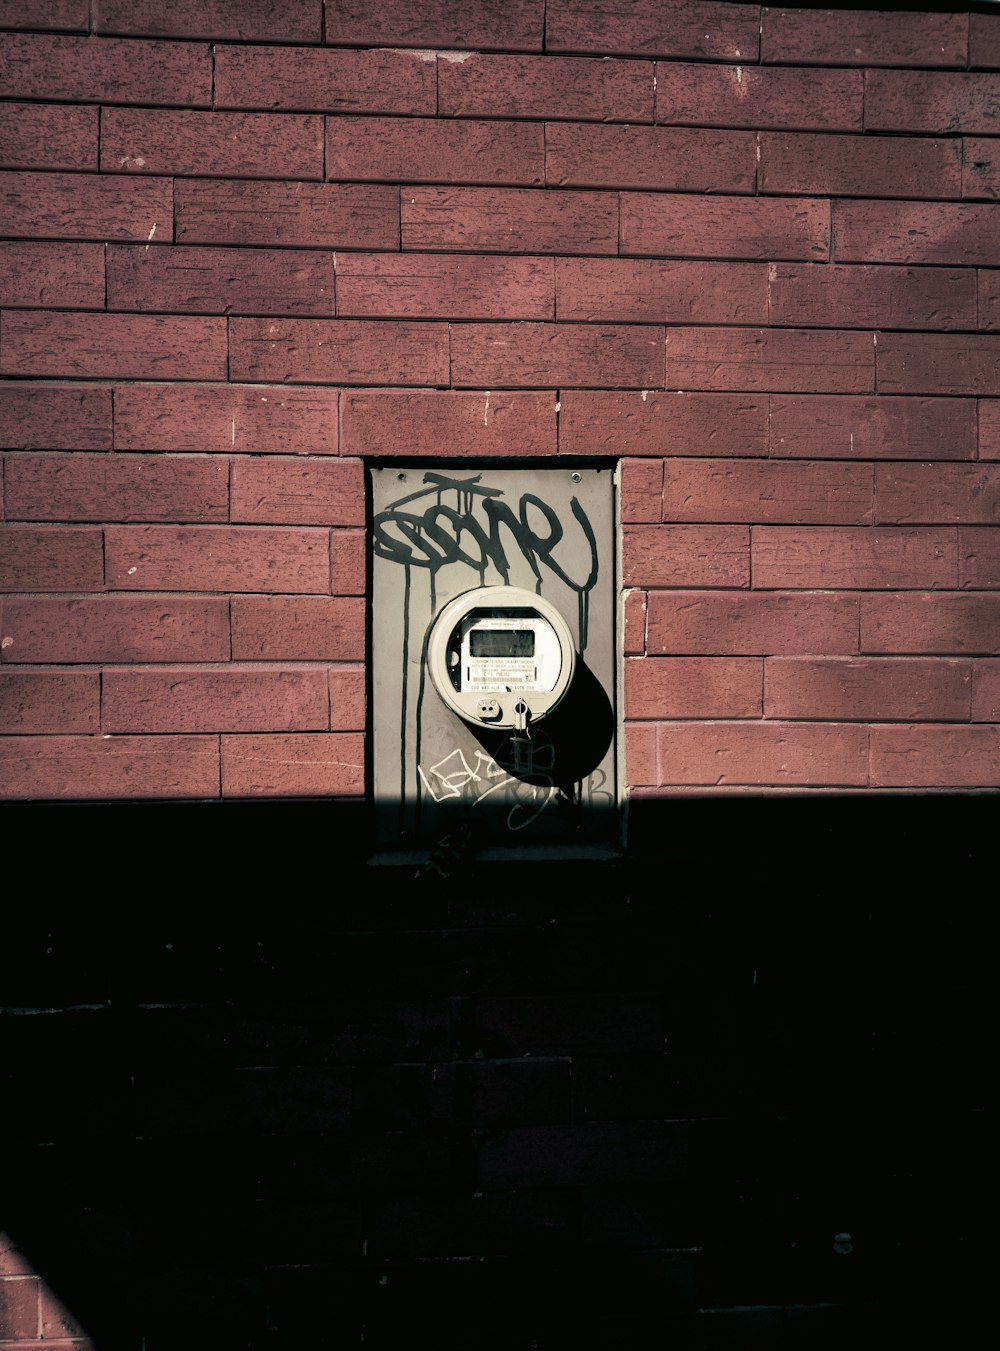 a brick wall with graffiti on it and a parking meter